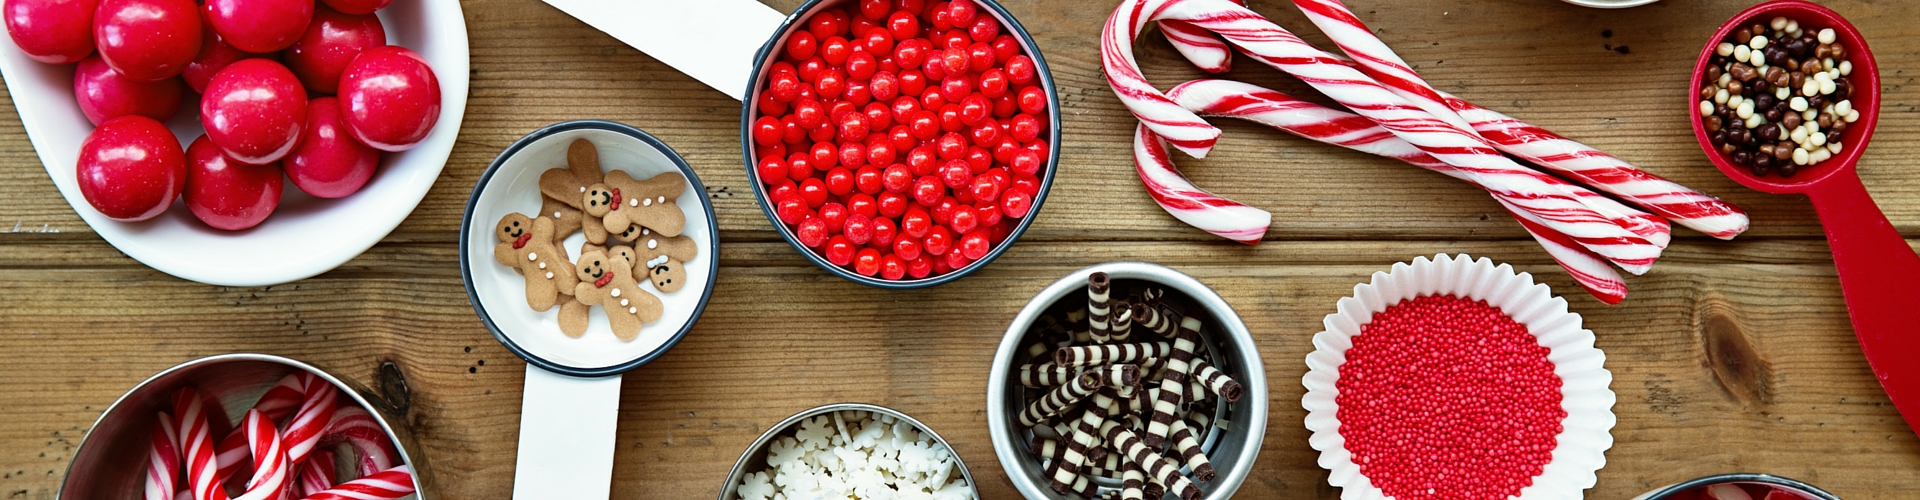 7 Rules of Holiday Hosting My Mother Taught Me